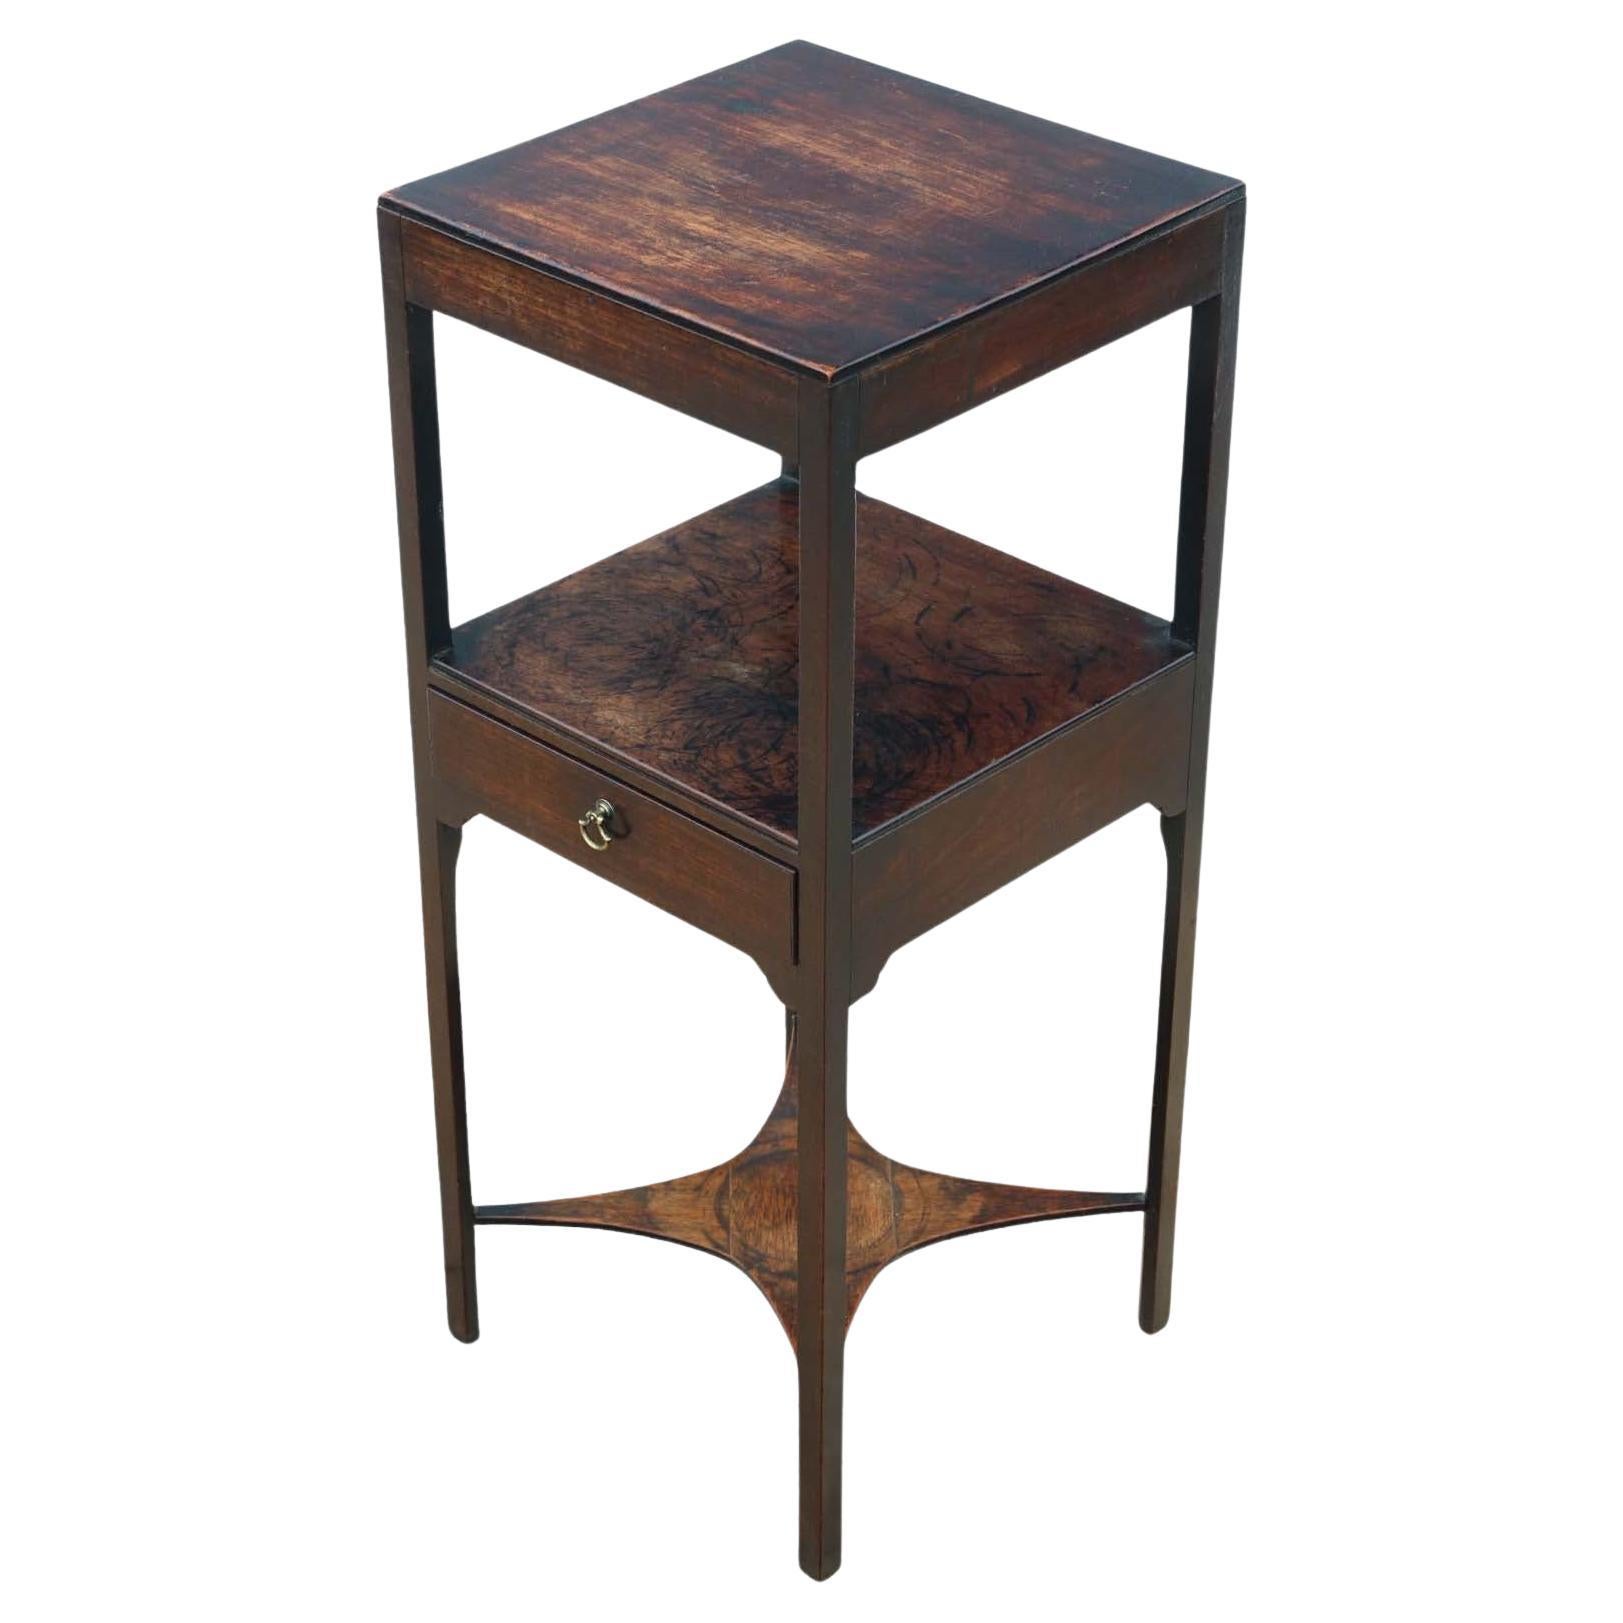 High-Quality Antique Mahogany Georgian Washstand Bedside Table Nightstand C1800